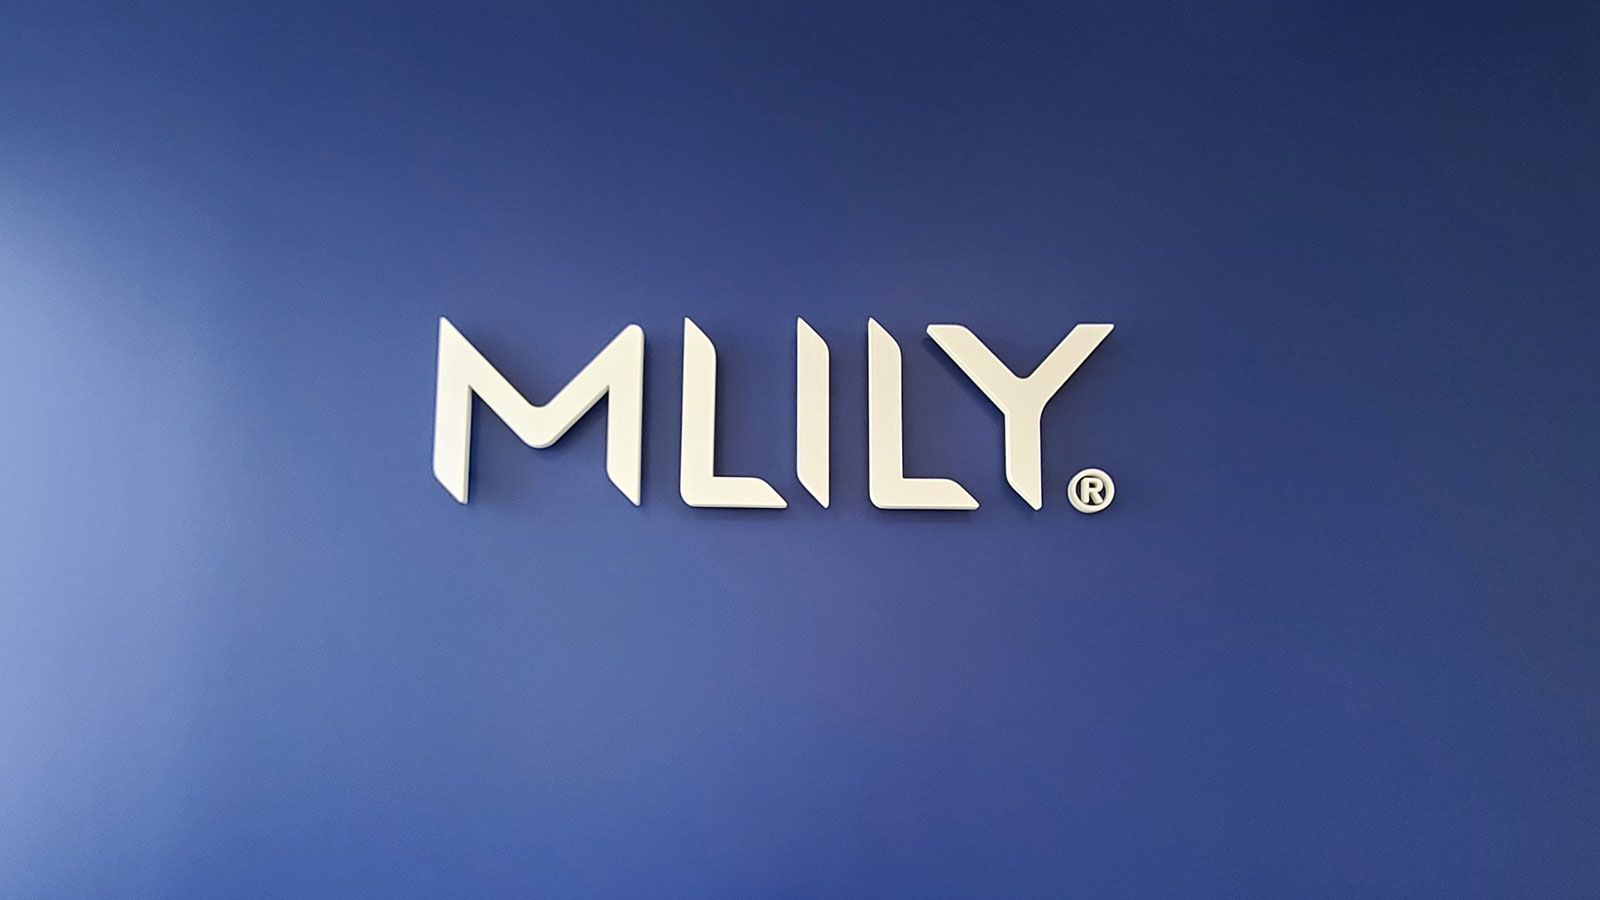 Mlily office sign